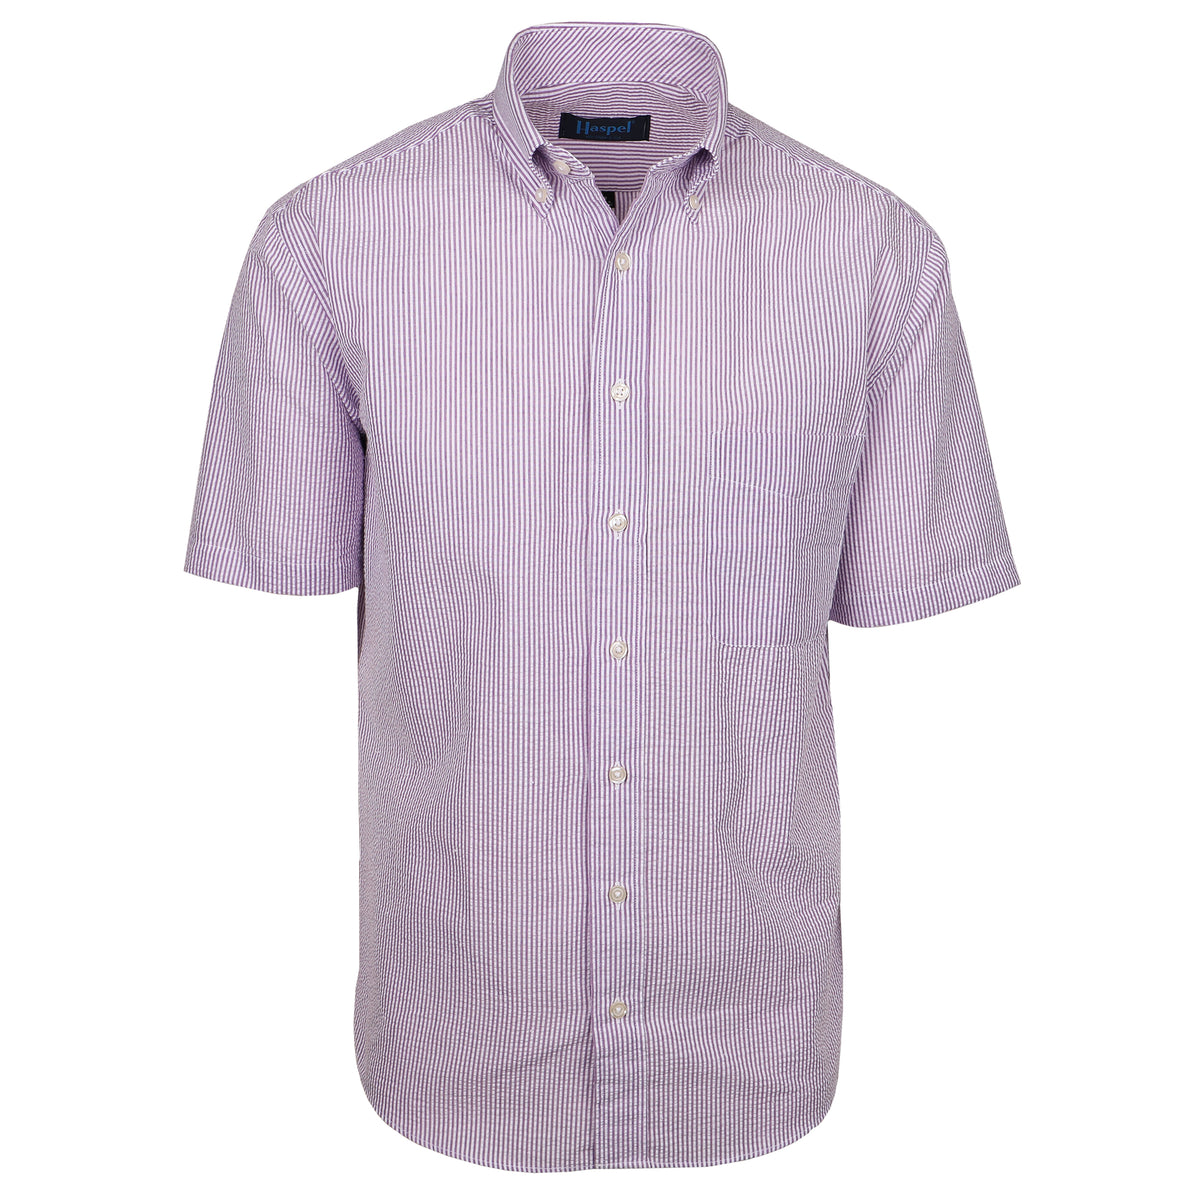 Seersucker all year long in a lavender purple seersucker shirt. Subtle, lightweight, and a texture they begs a second look.  100% Cotton Seersucker • Button Down Collar • Short Sleeve • Chest Pocket • Machine Washable • Made in Italy 